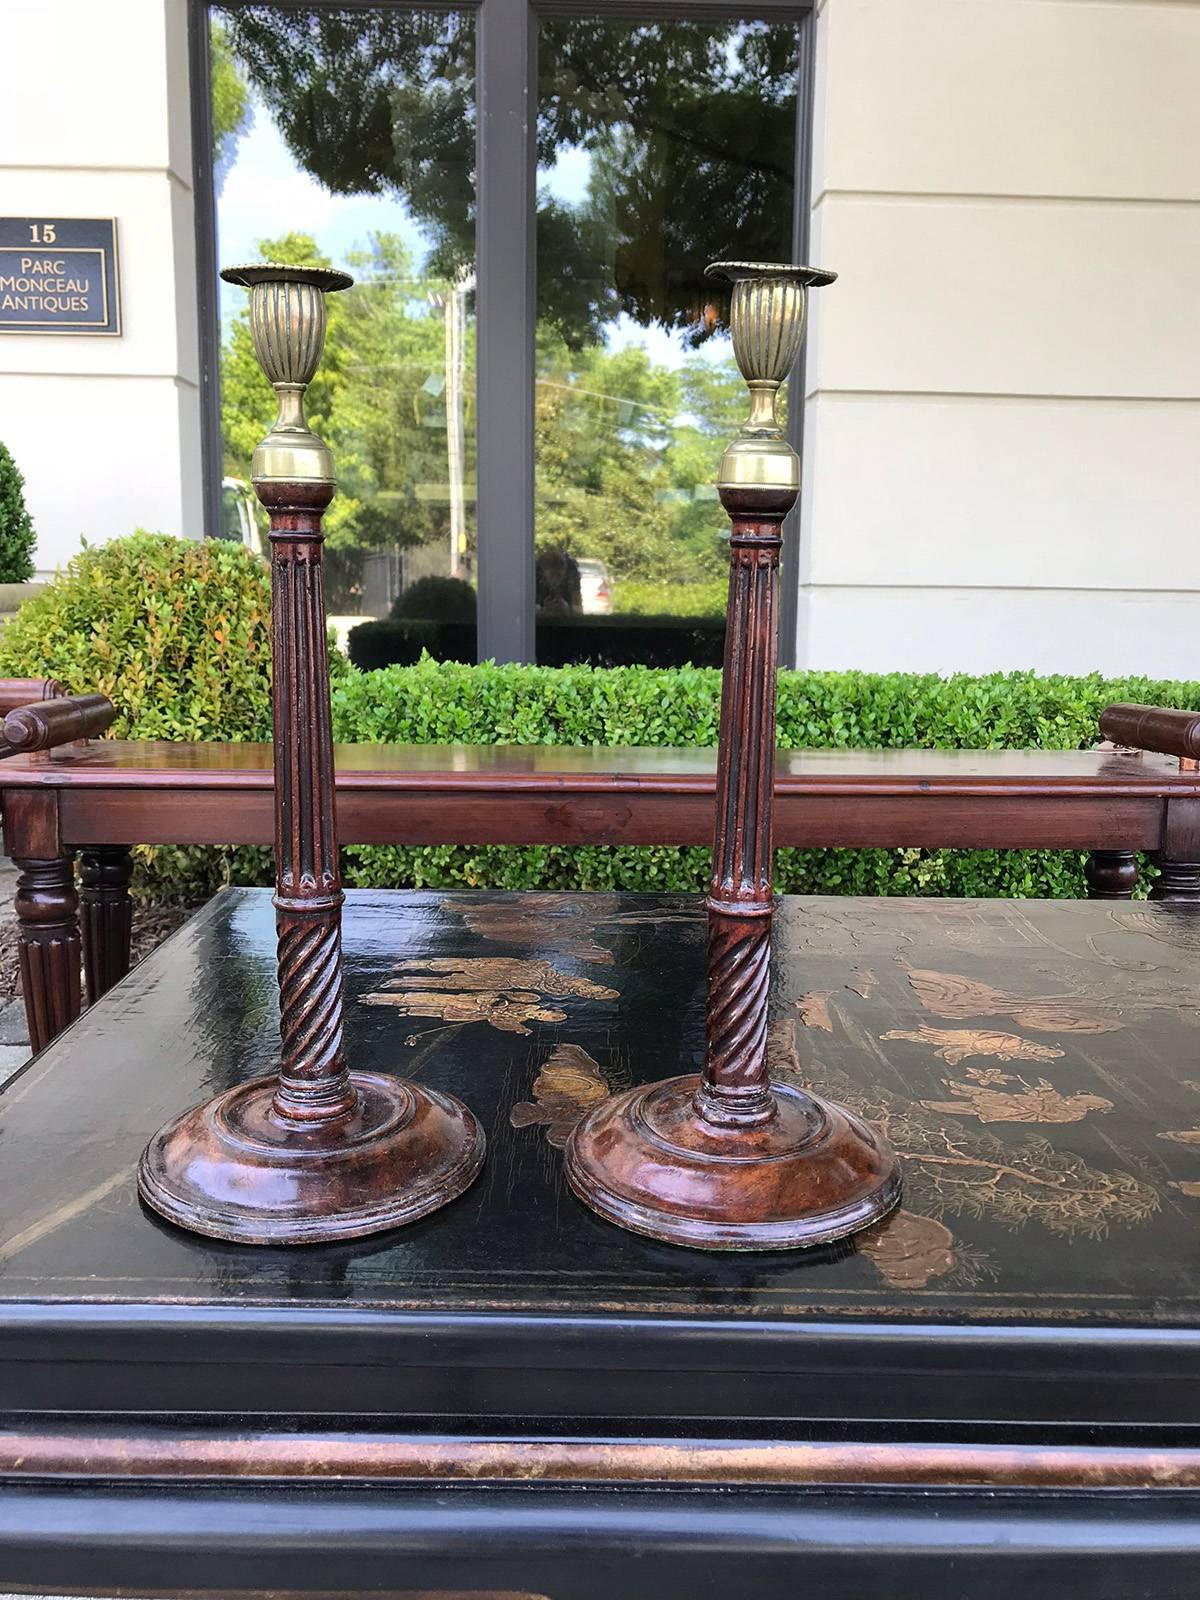 Pair of 18th-19th century George III style antique brass-mounted candlesticks.